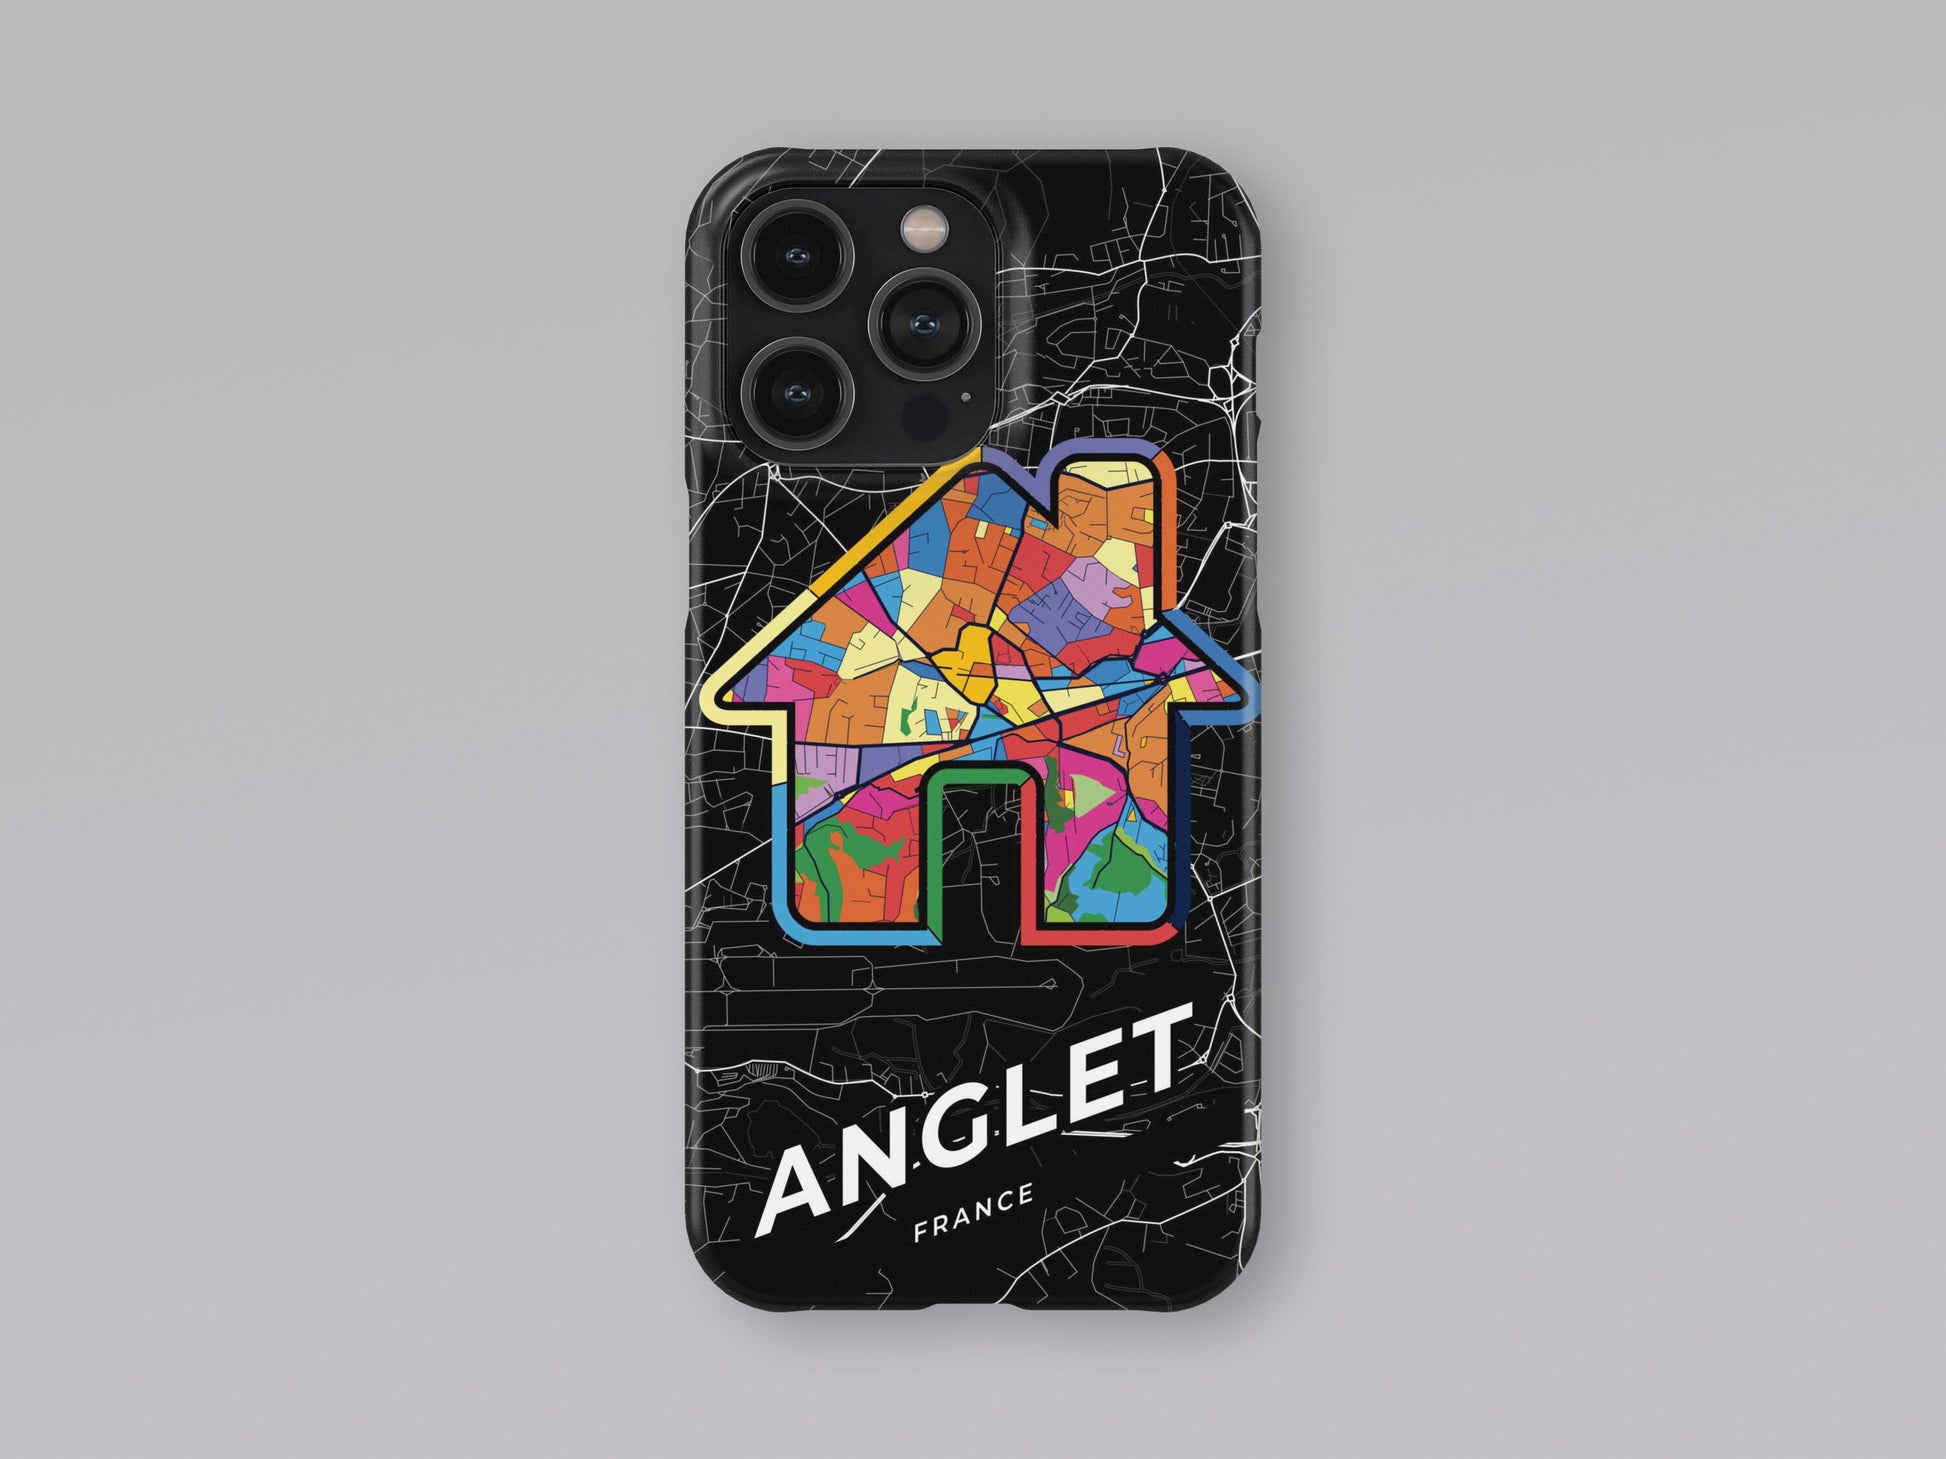 Anglet France slim phone case with colorful icon. Birthday, wedding or housewarming gift. Couple match cases. 3